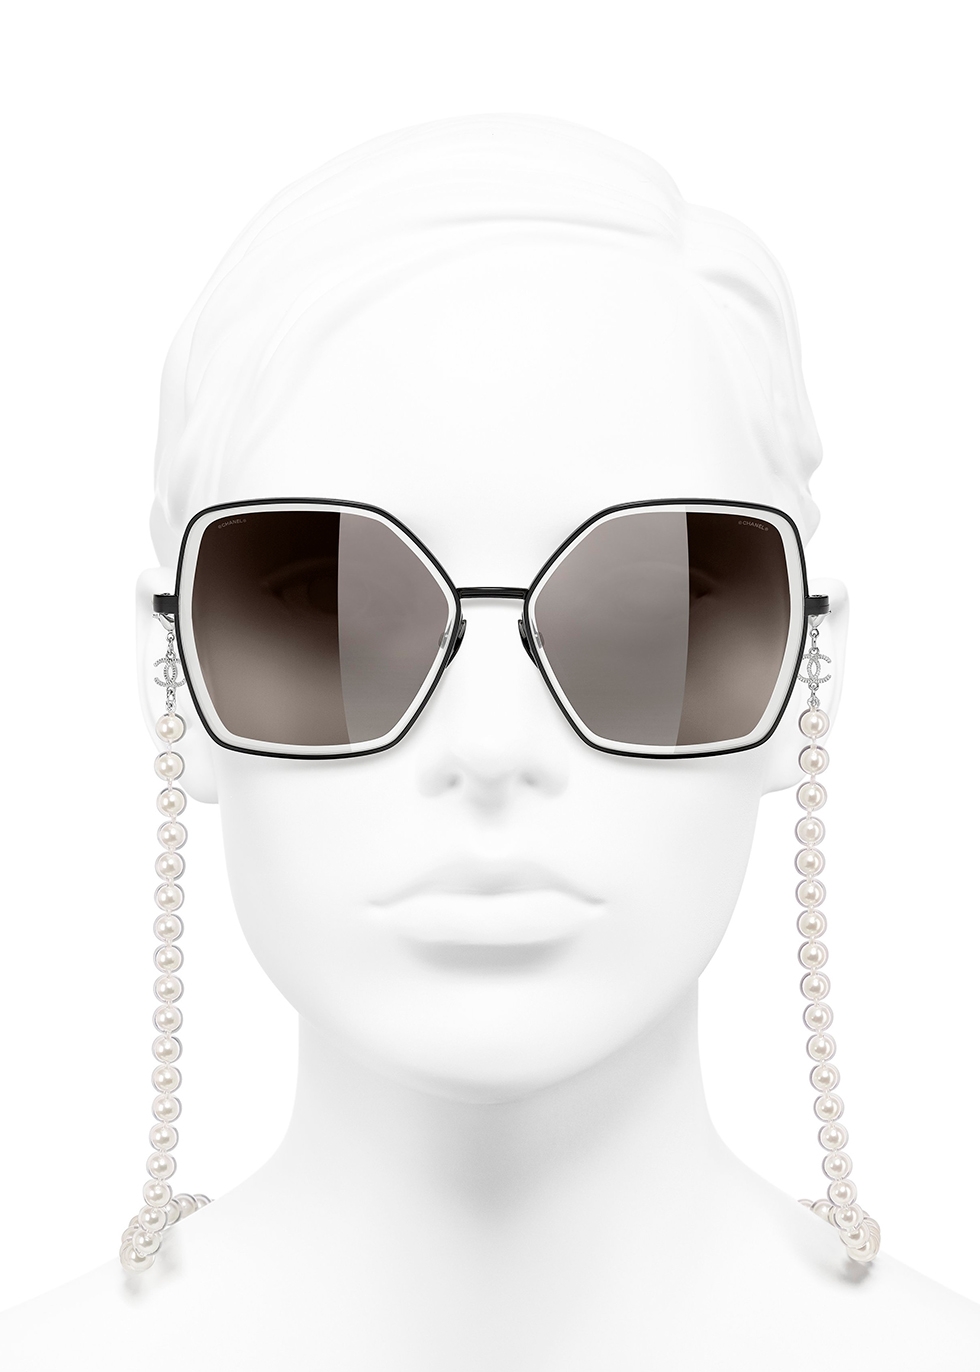 Chanel sunglasses with pearl chain Womens Fashion Watches  Accessories  Sunglasses  Eyewear on Carousell